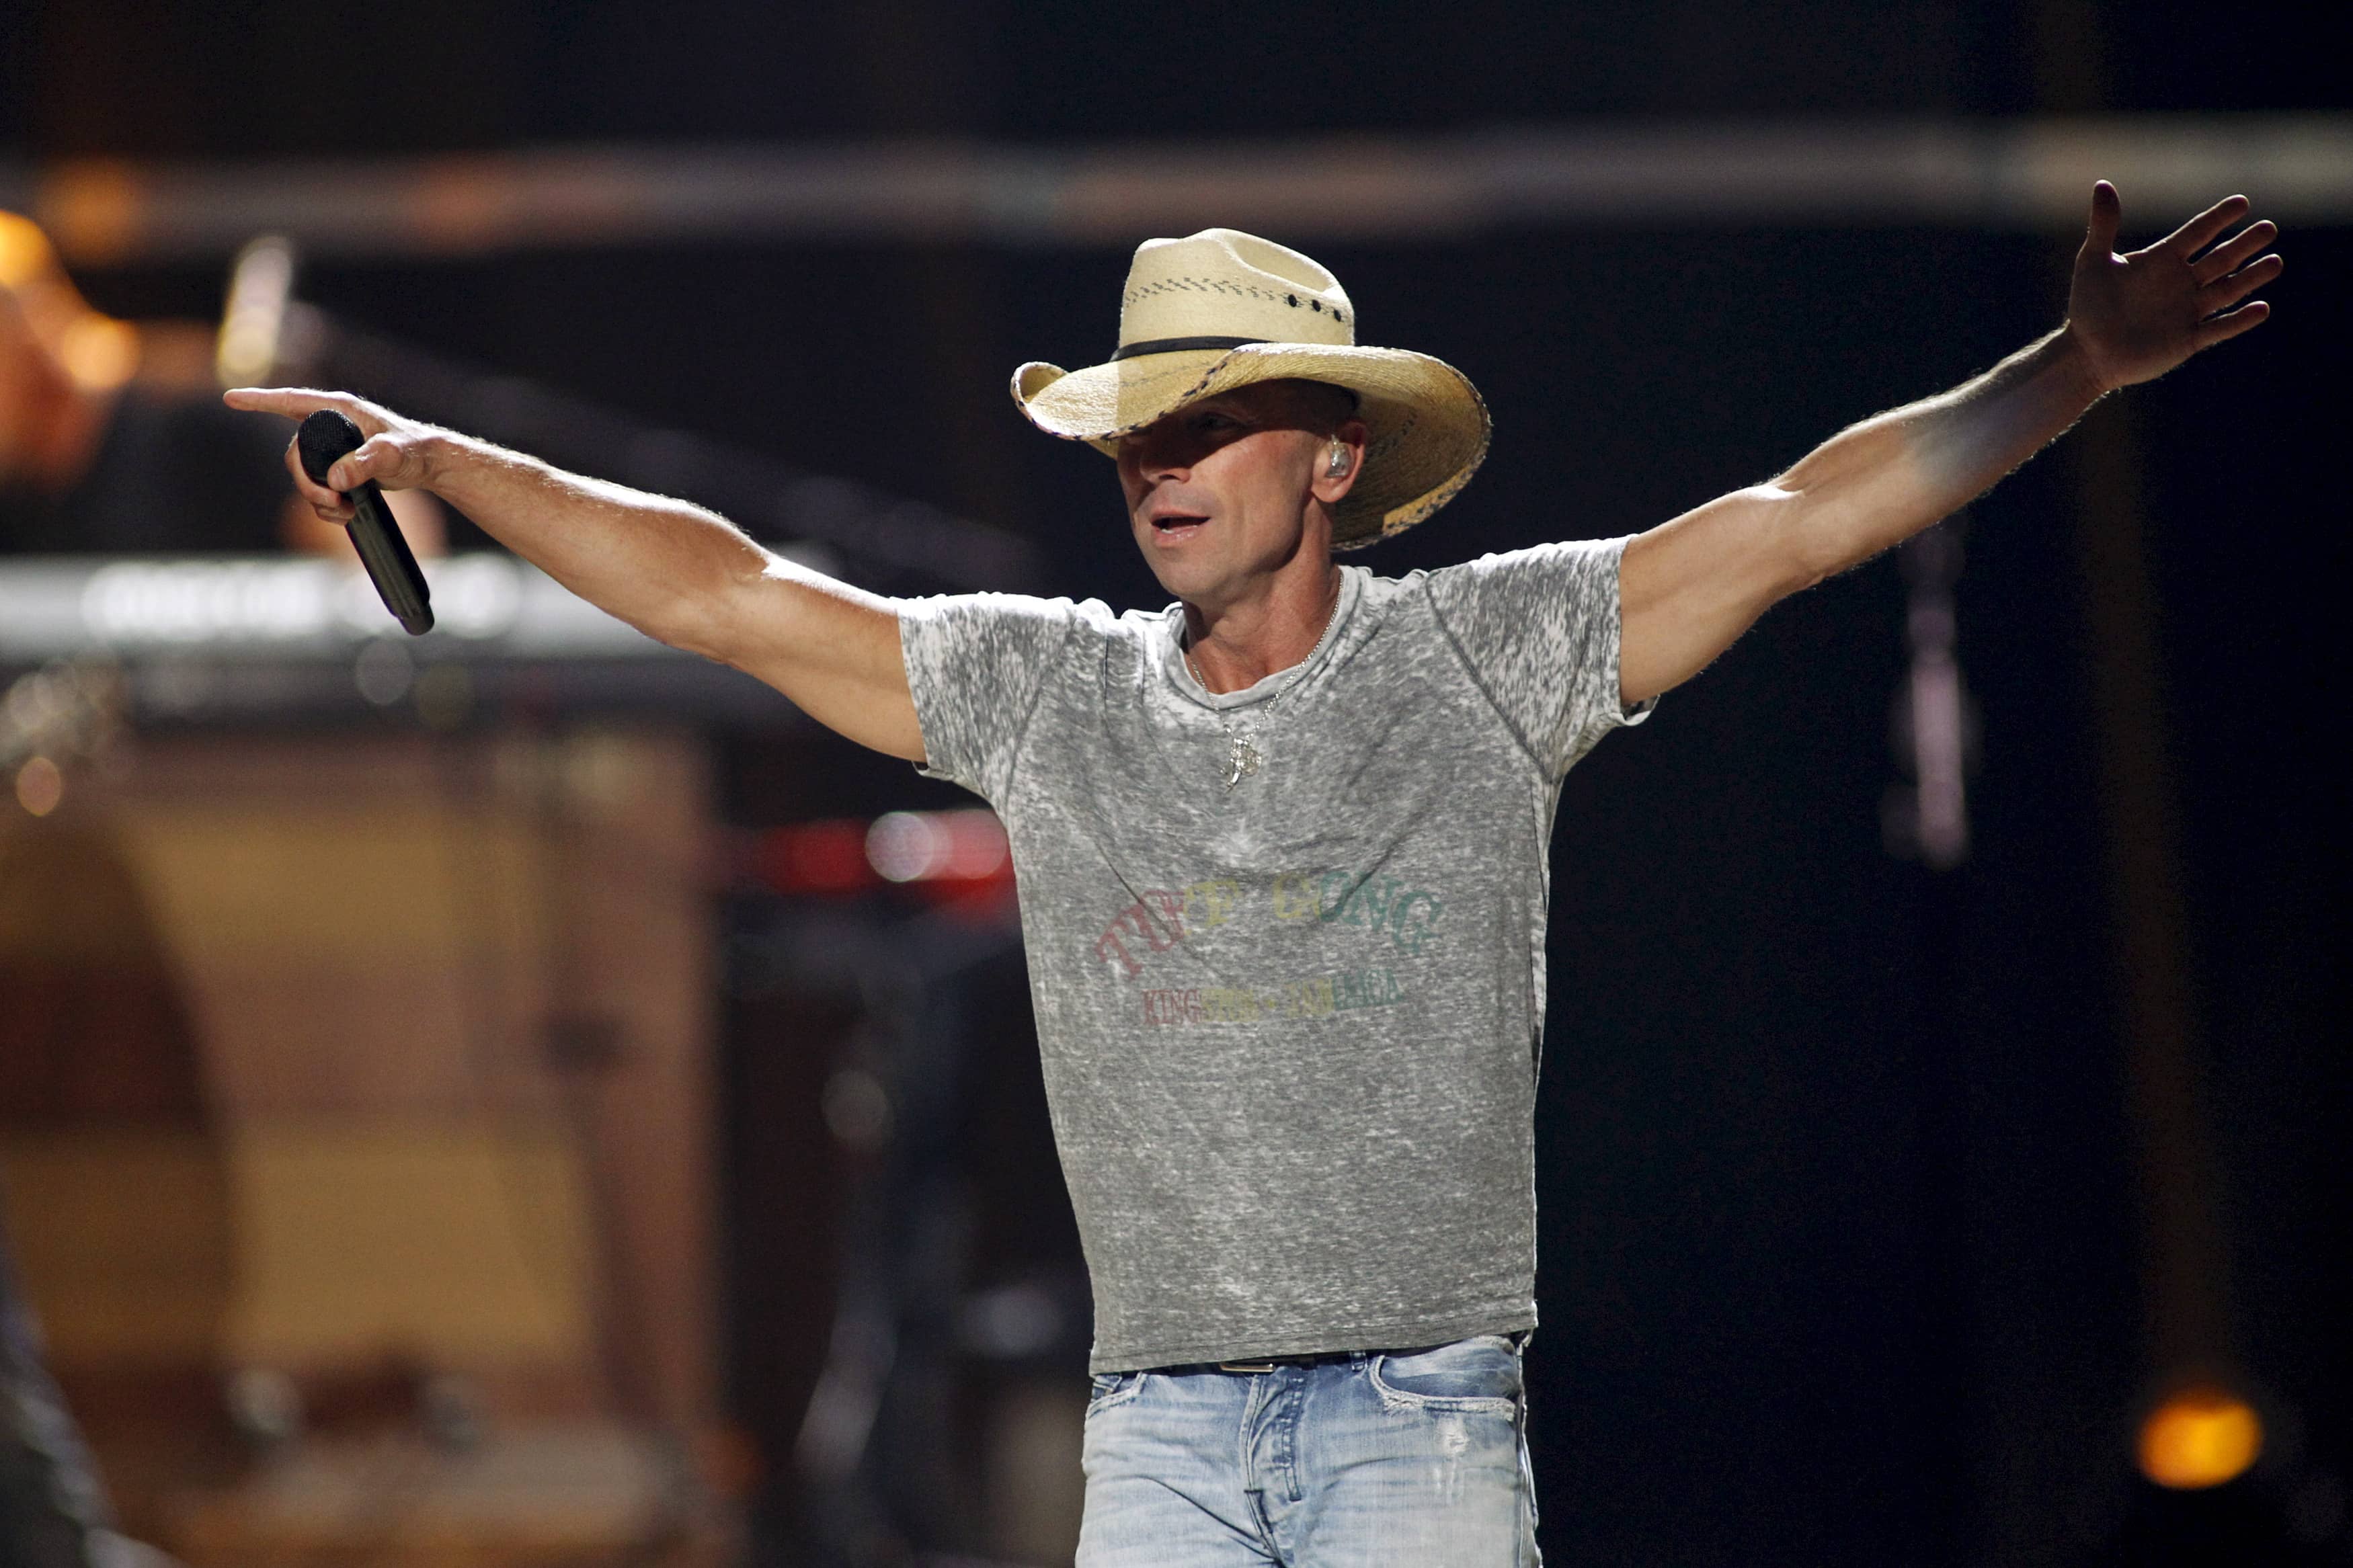 kenny-chesney-performs-during-the-2015-iheartradio-music-festival-at-the-mgm-grand-garden-arena-in-las-vegas